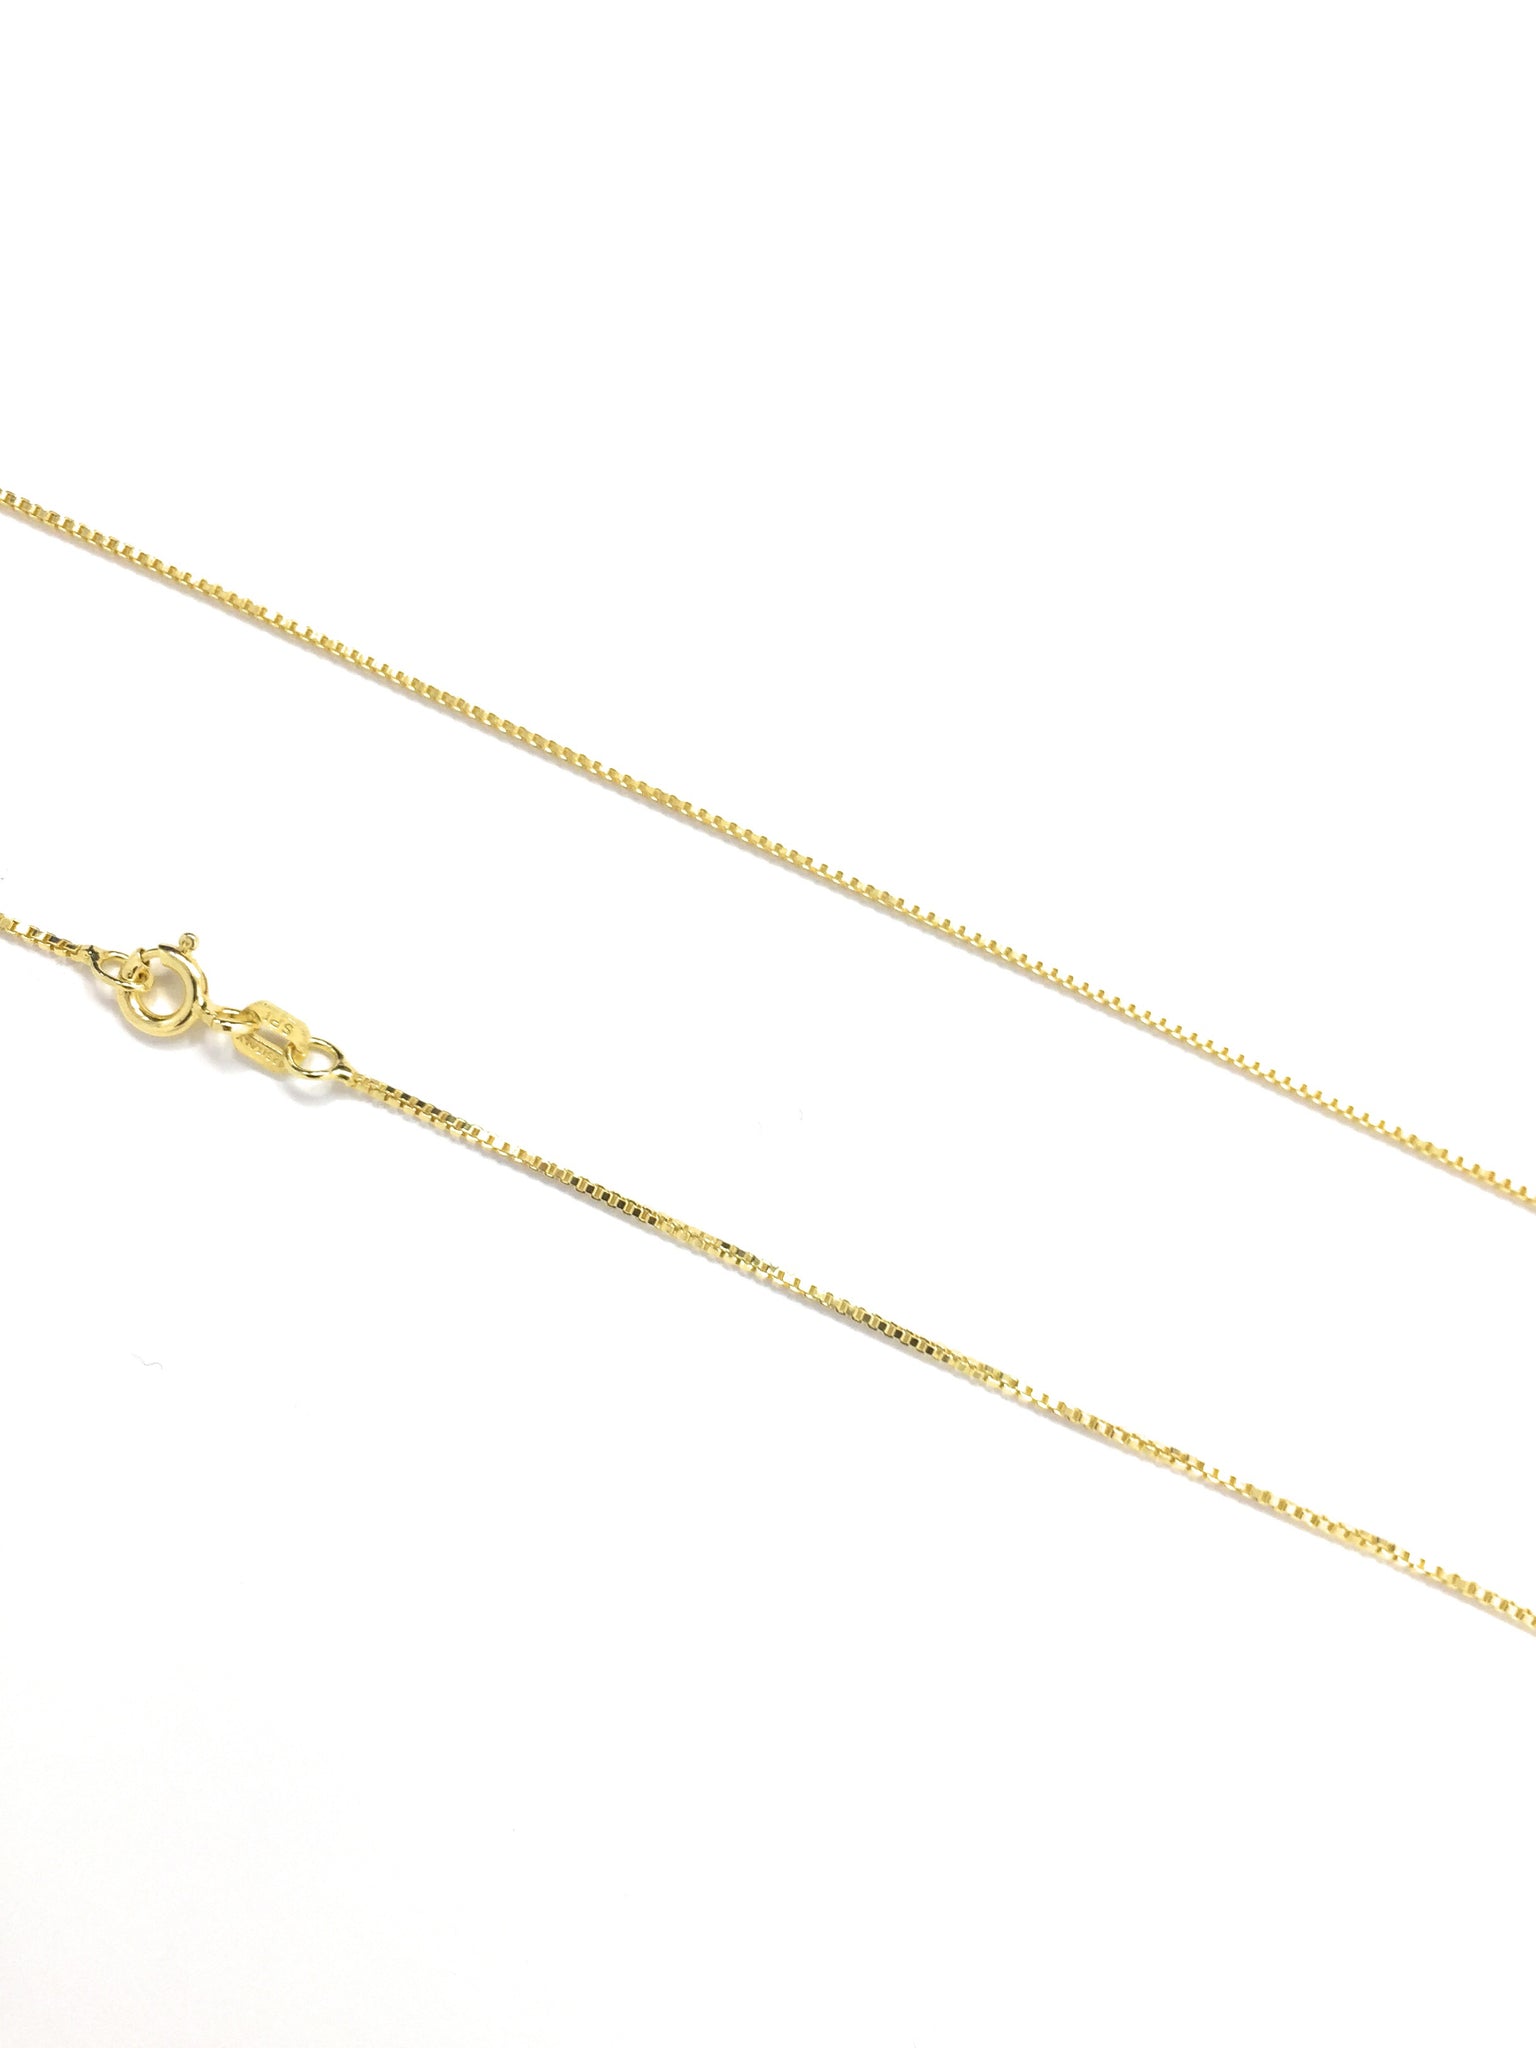 Gold Plated Over Sterling Silver Box Finished Chain Necklace, Diamond Cut Chain 0.8mm, Italy Chain